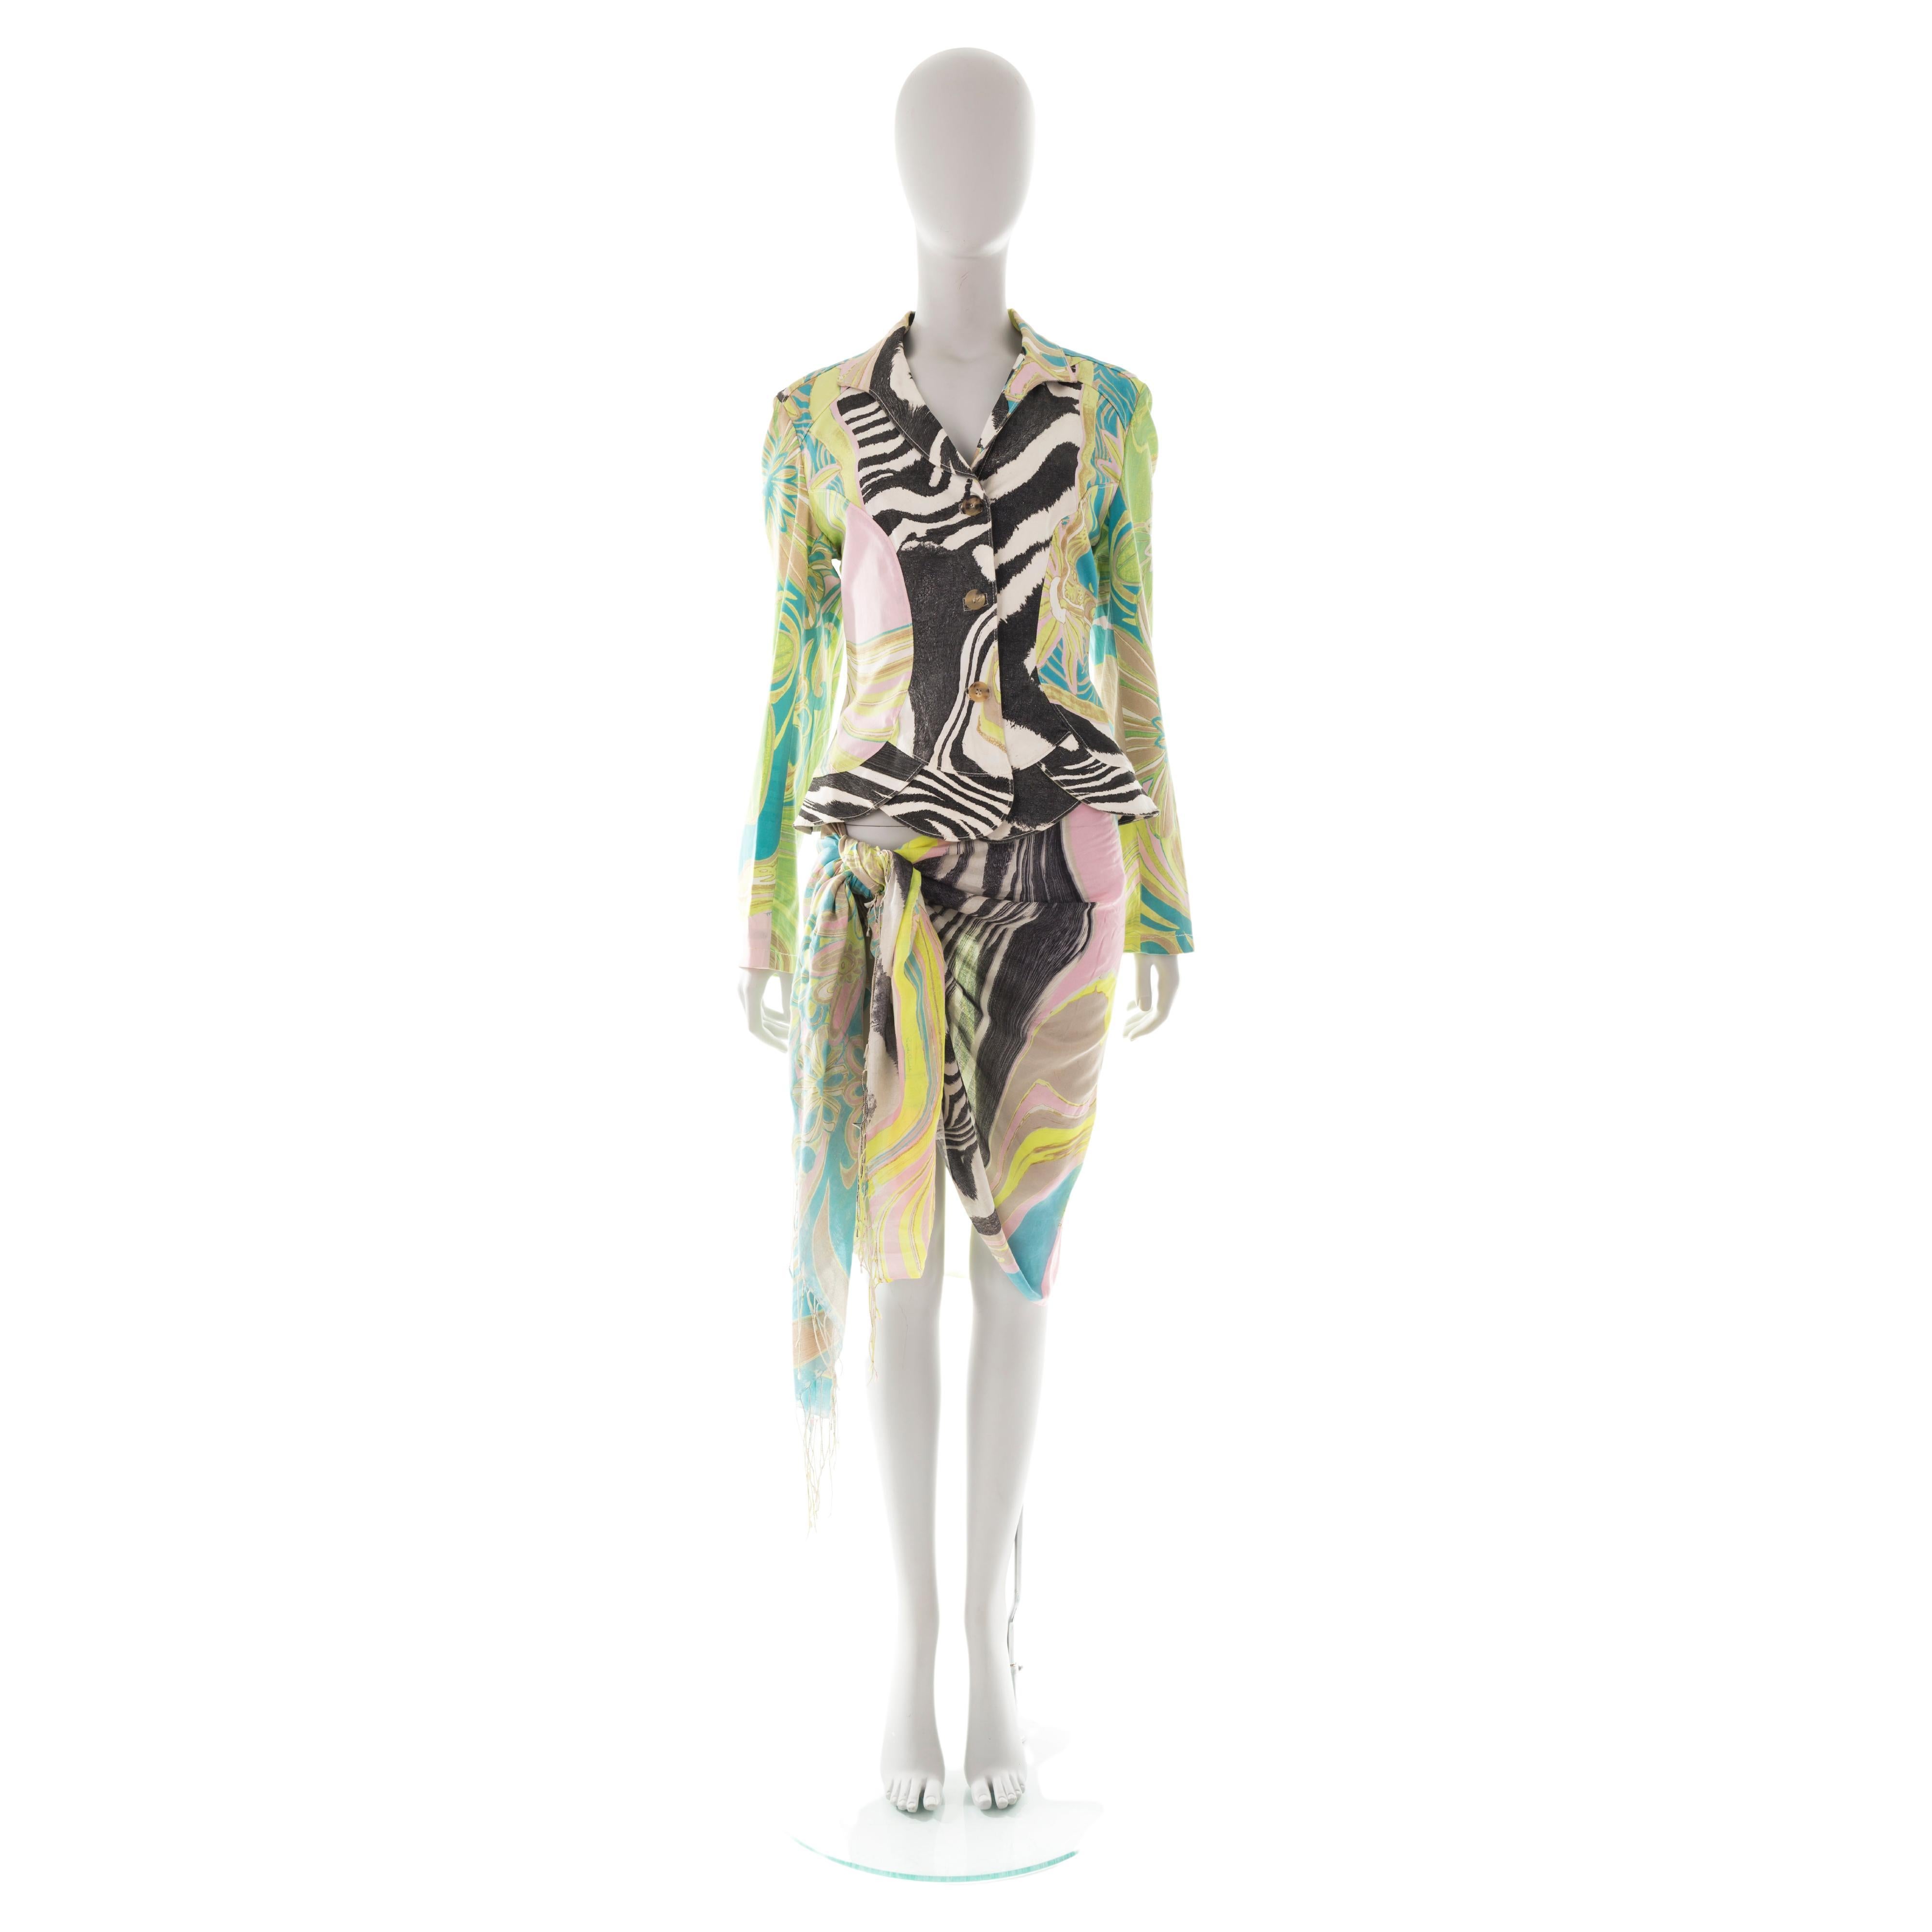 - Roberto Cavalli jacket + sarong set
- Sold by Gold Palms Vintage
- Spring/Summer 2004
- Cotton button-up jacket
- Fringed foulard (which can be styled at will)
- Zebra print + abstract green/blue floral print
- Size